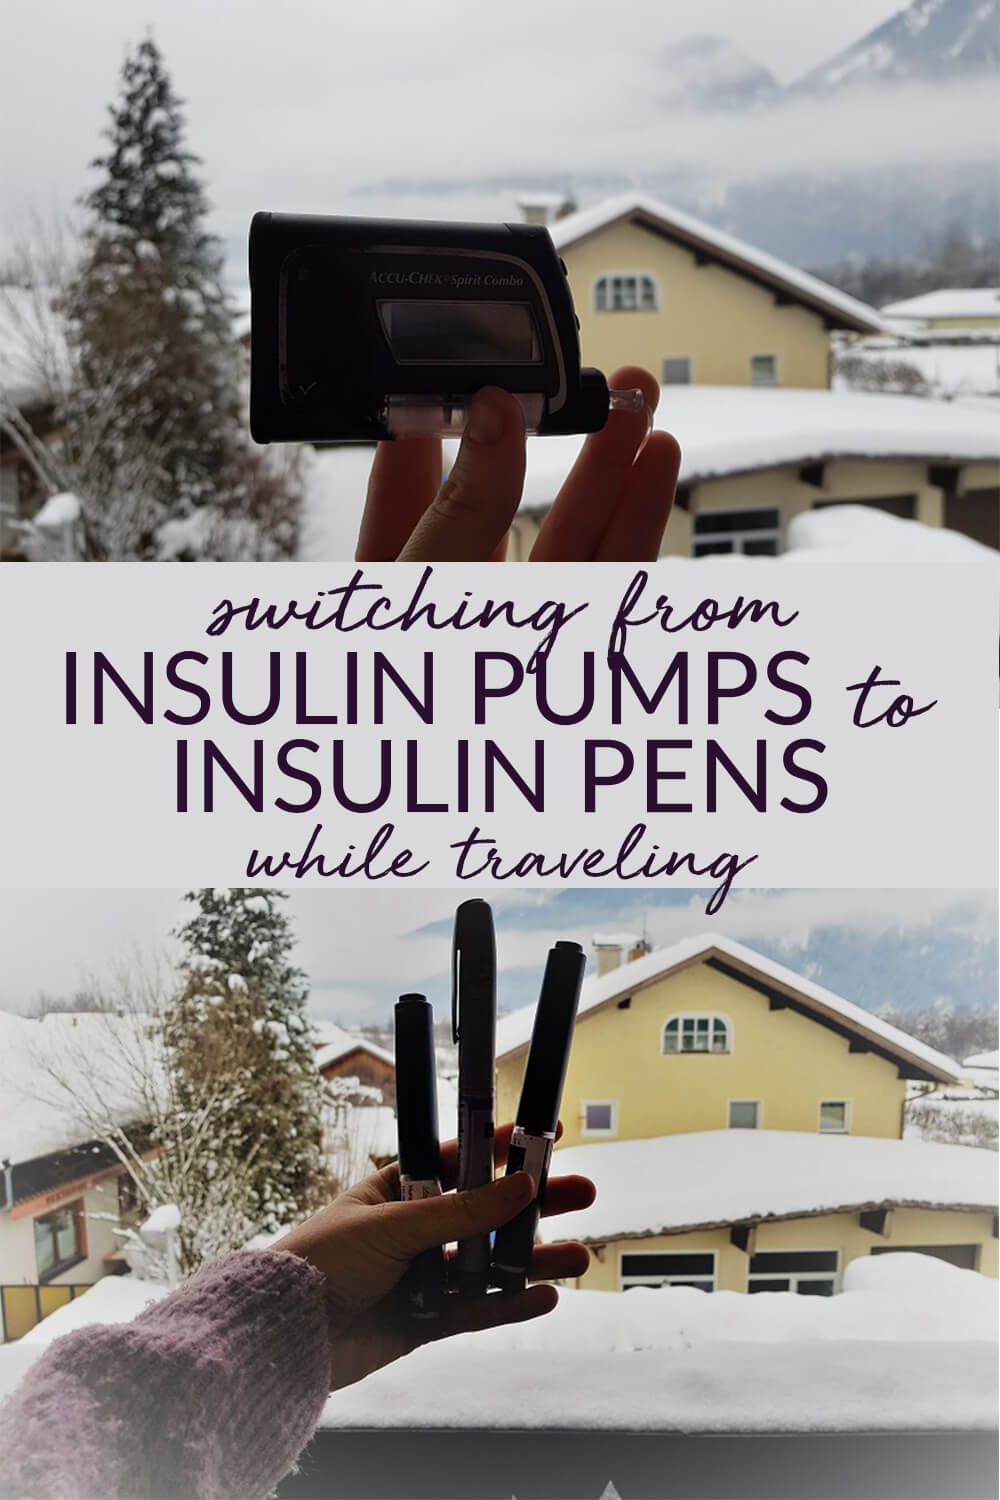 Switching from Insulin Pumps to Insulin Pens While Traveling